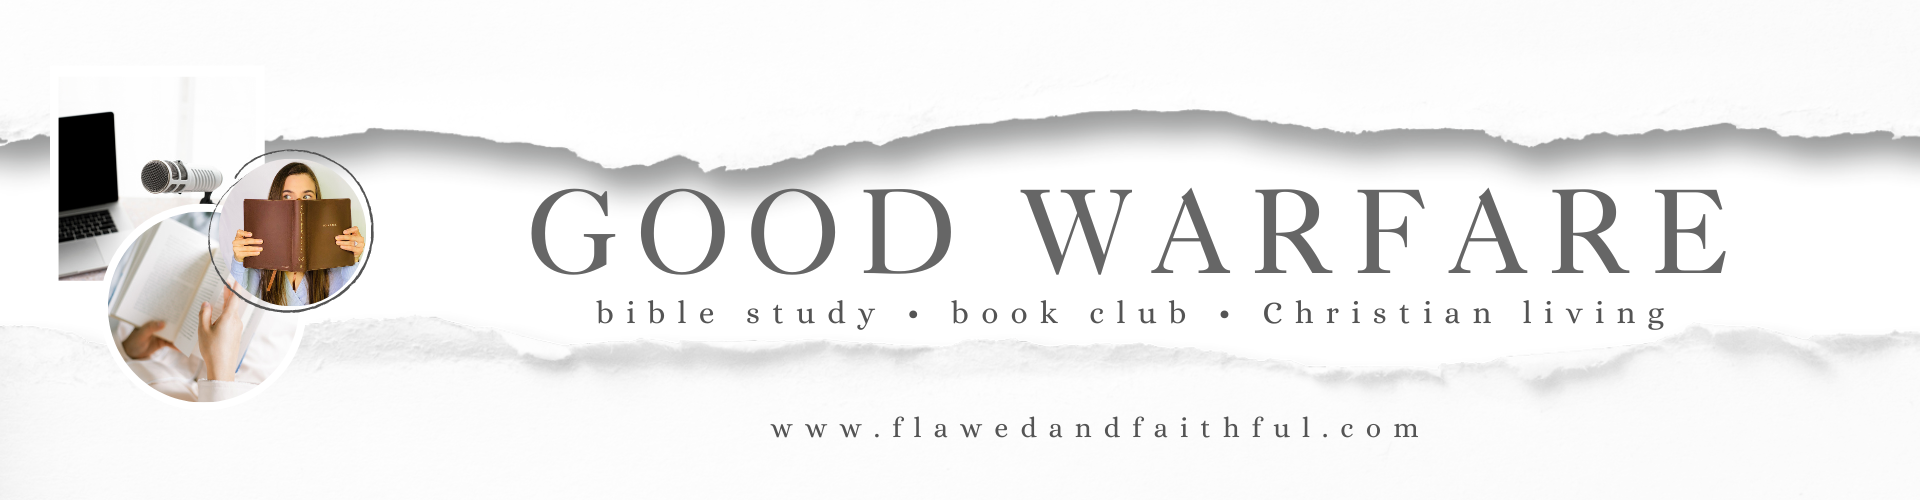 Good Warfare | Life Lessons in the Bible, Bible Study for New Believers, Encouraging Devotions for Women